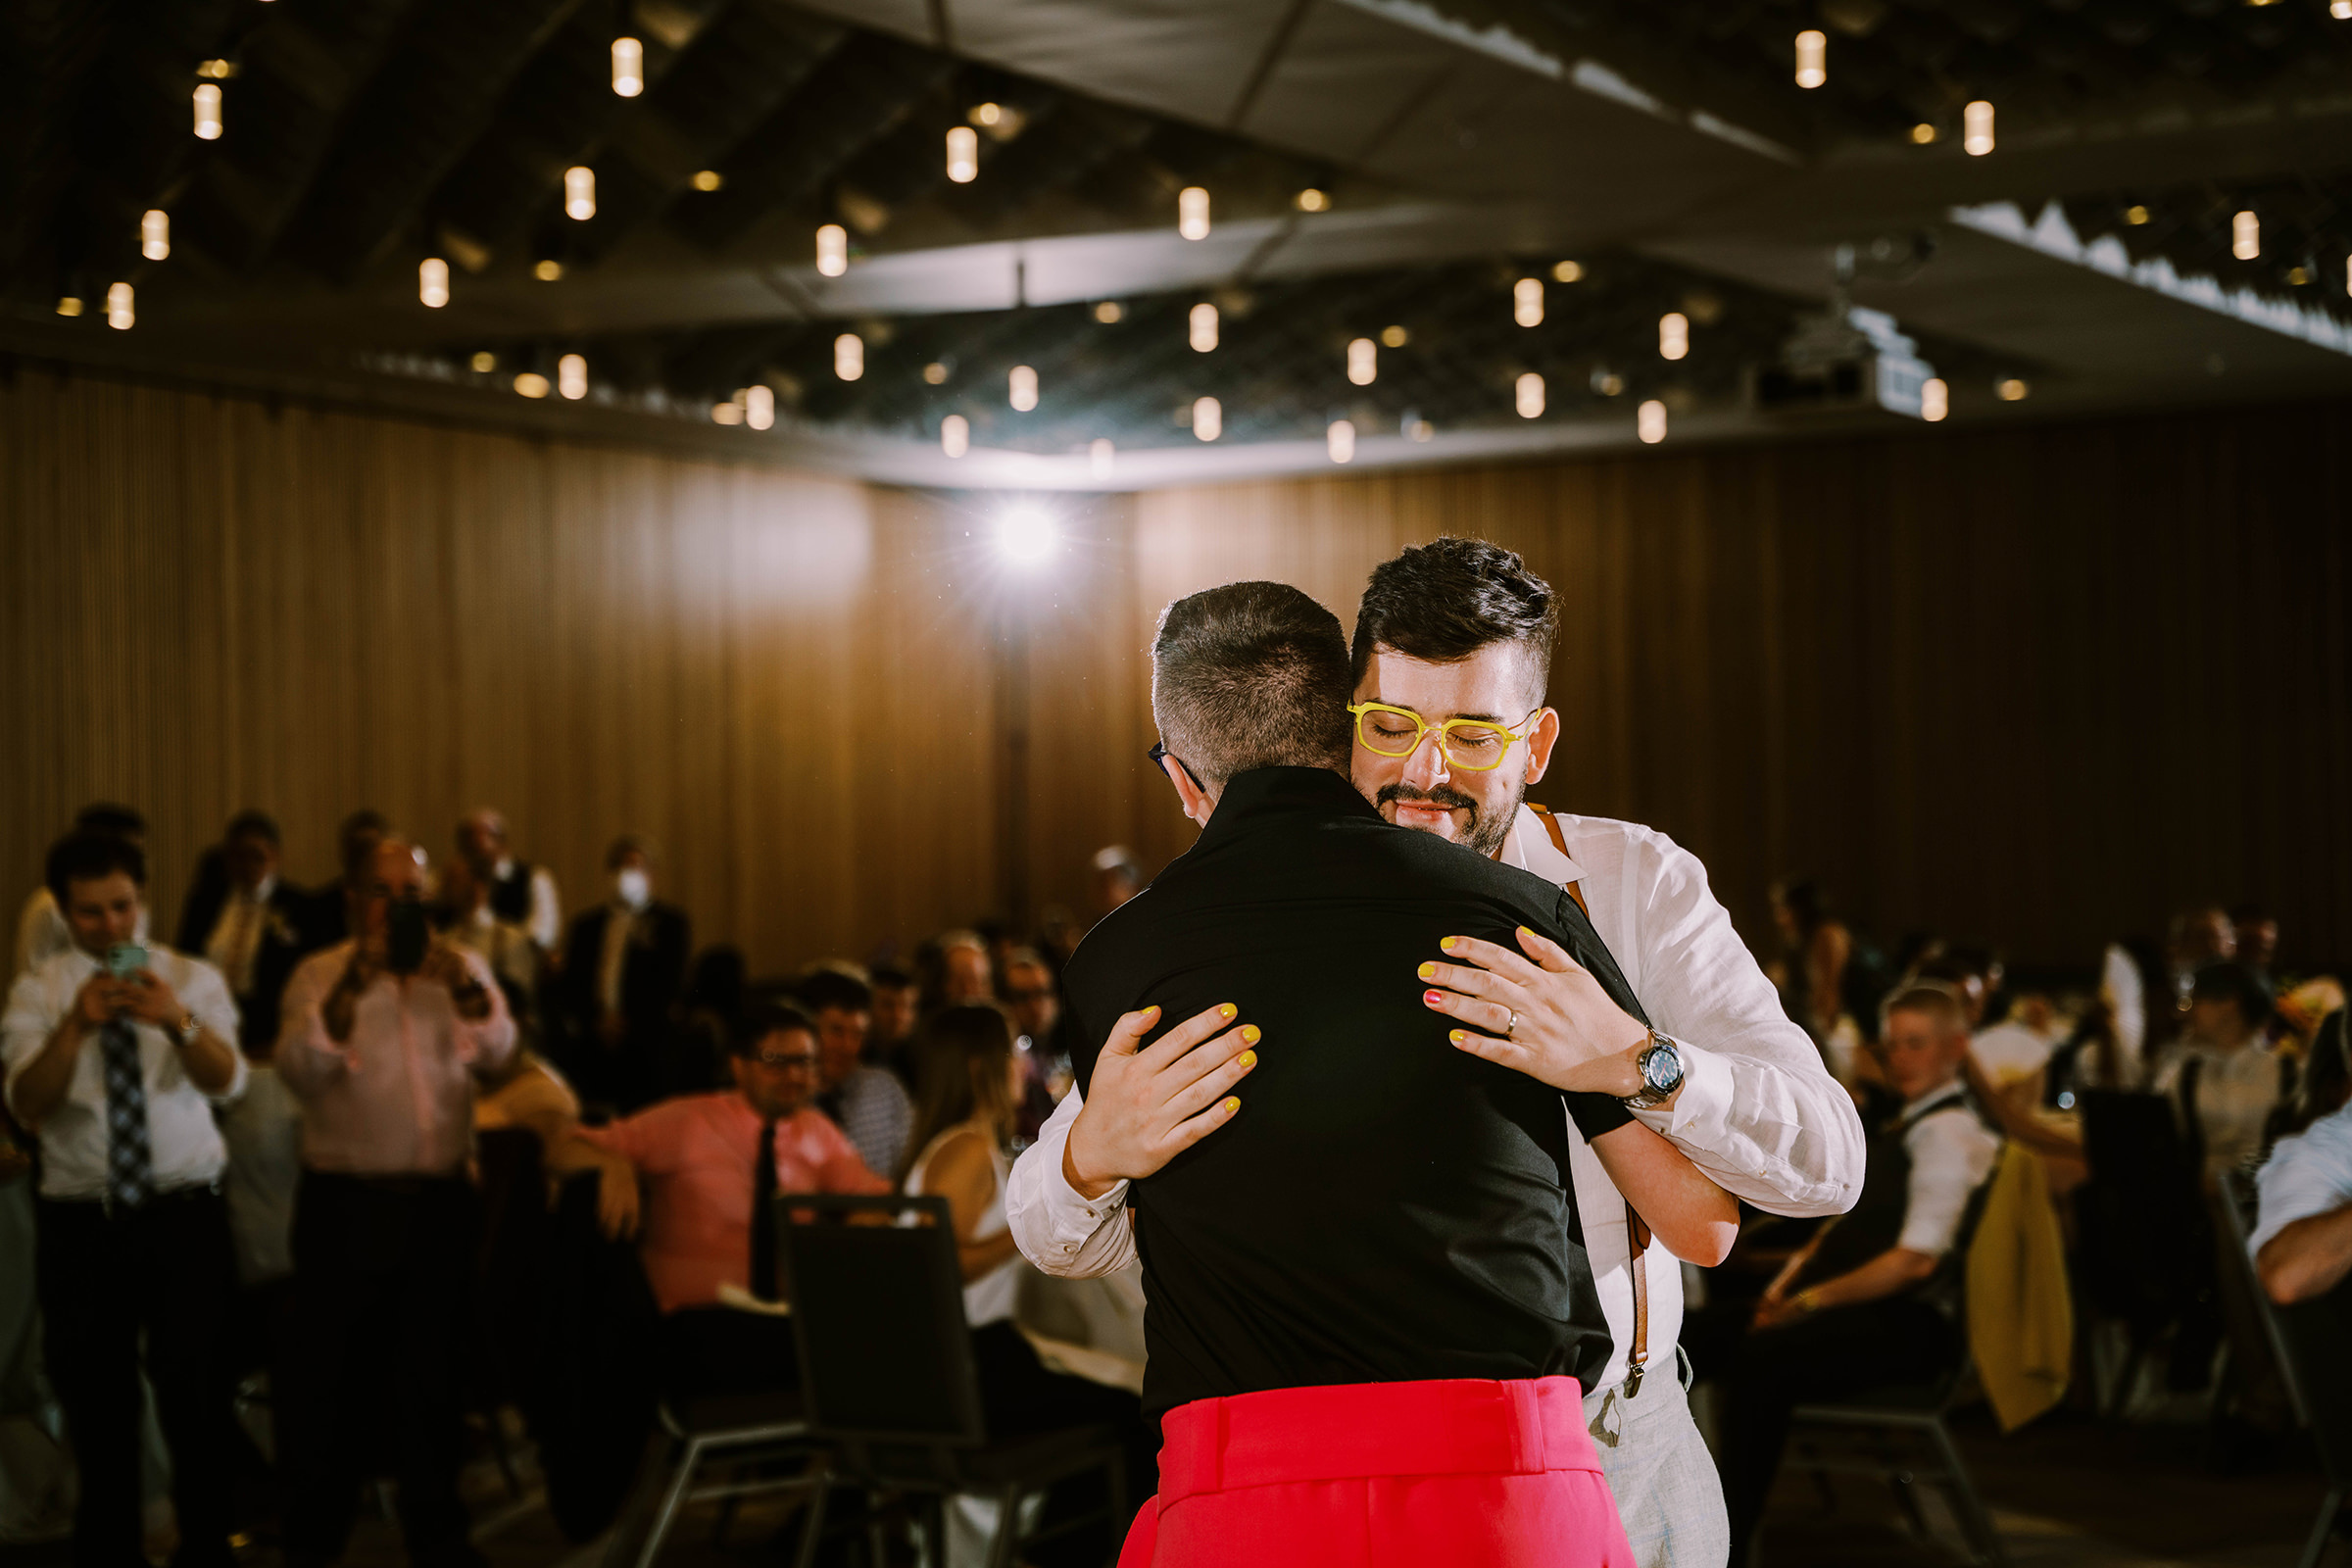 Joey and Dustin's first dance at their wedding reception at Bell Harbor Conference Center, summer 2022